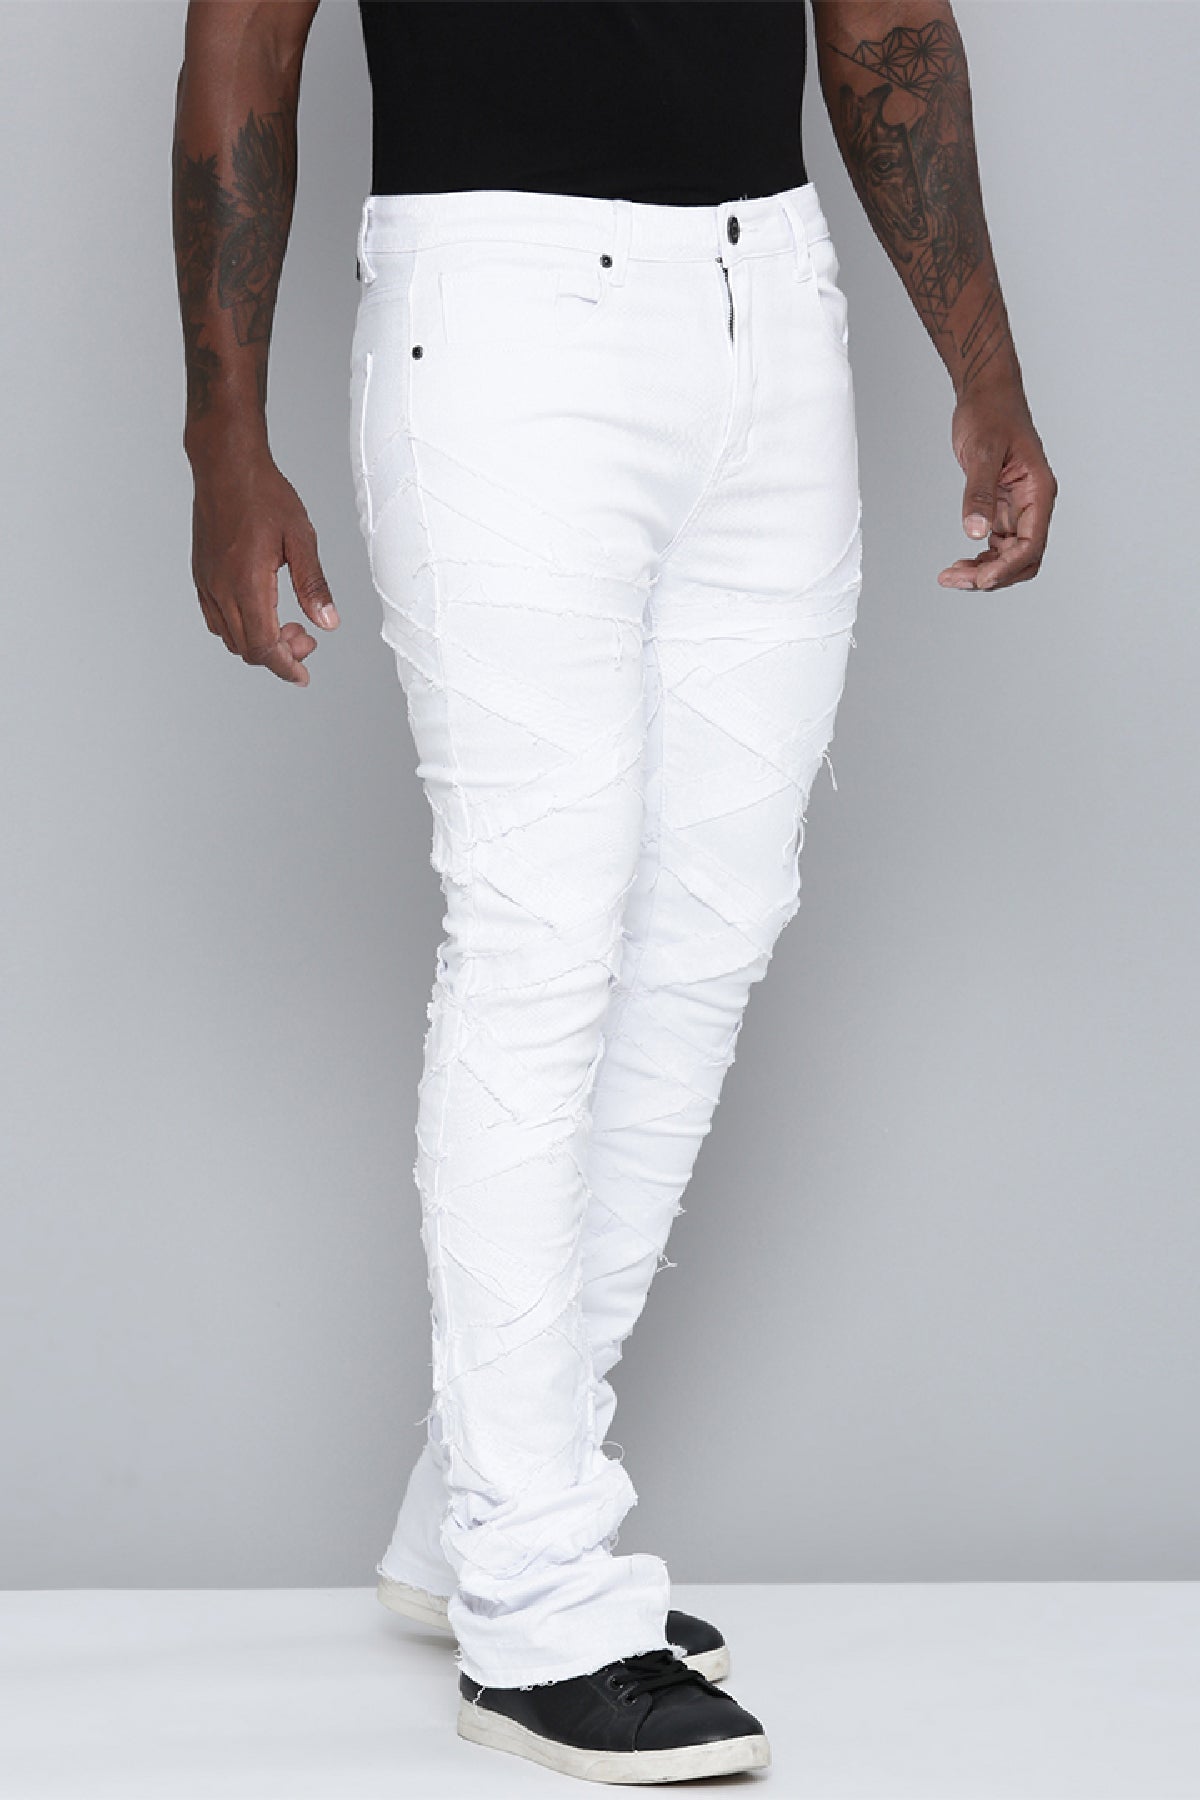 Discover 54+ white distressed jeans mens latest